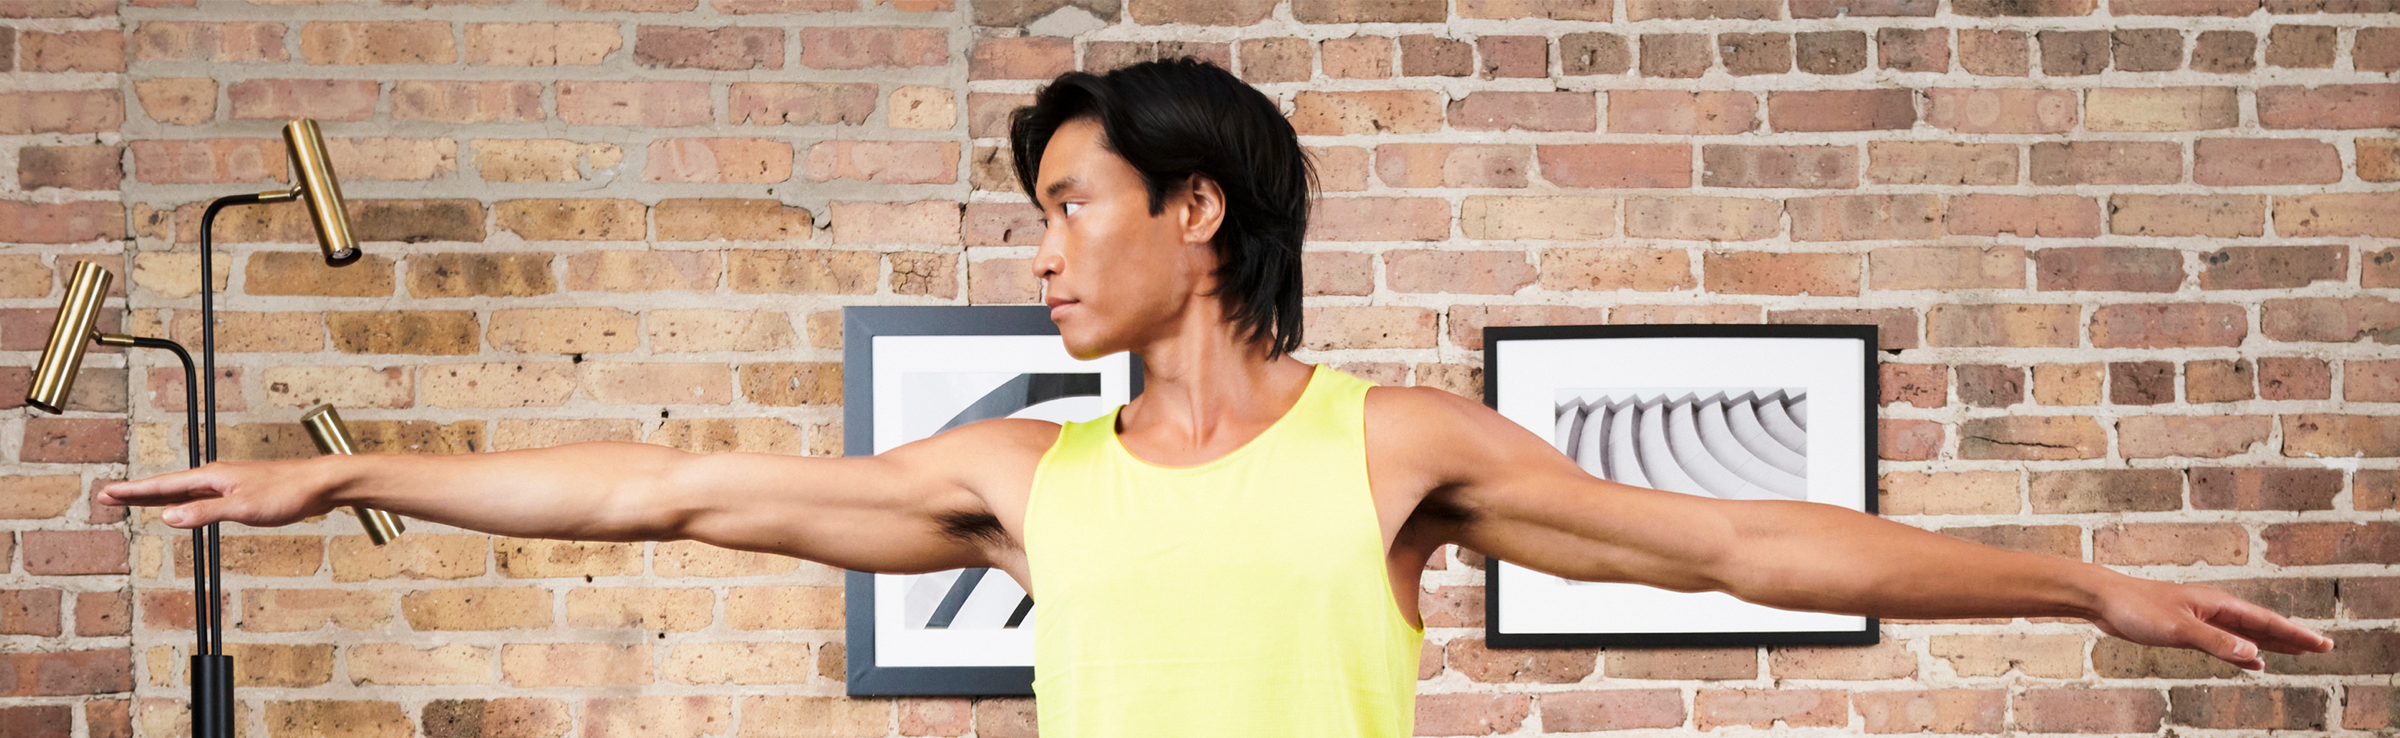 Male standing in yoga position Warrior 2 pose against brick wall residential interior background.